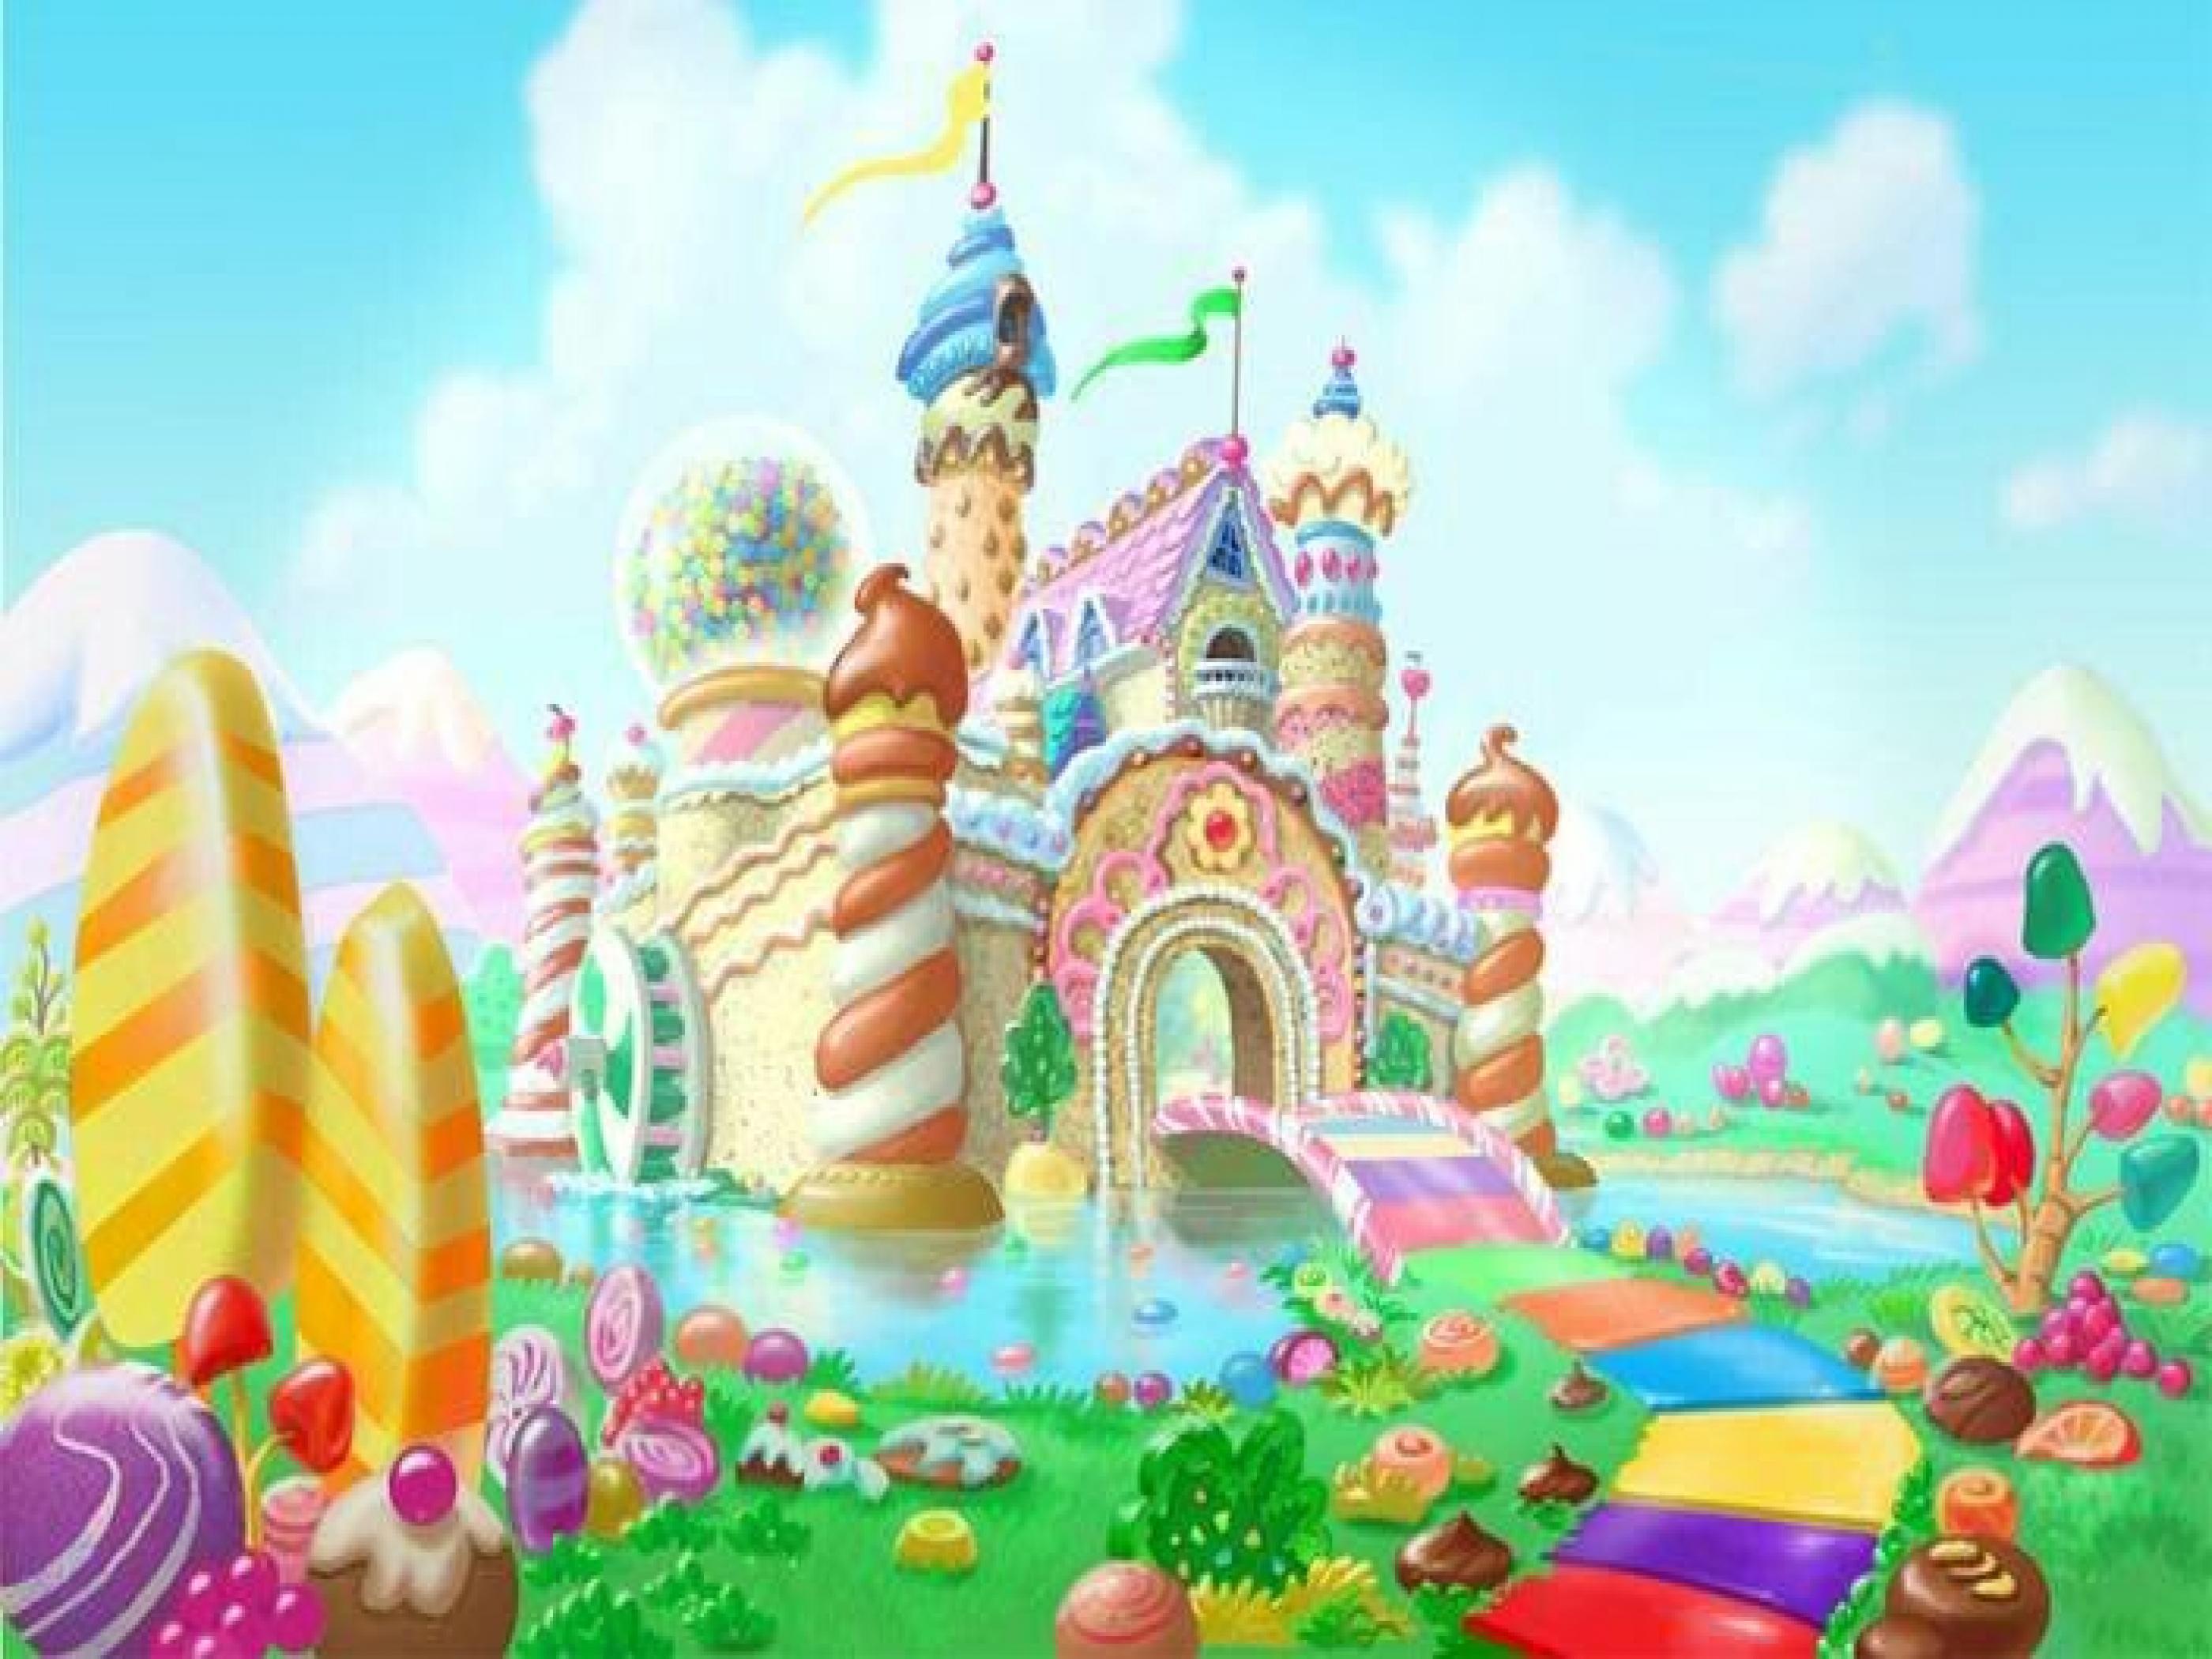 Candy Land Background Images HD Pictures and Wallpaper For Free Download   Pngtree